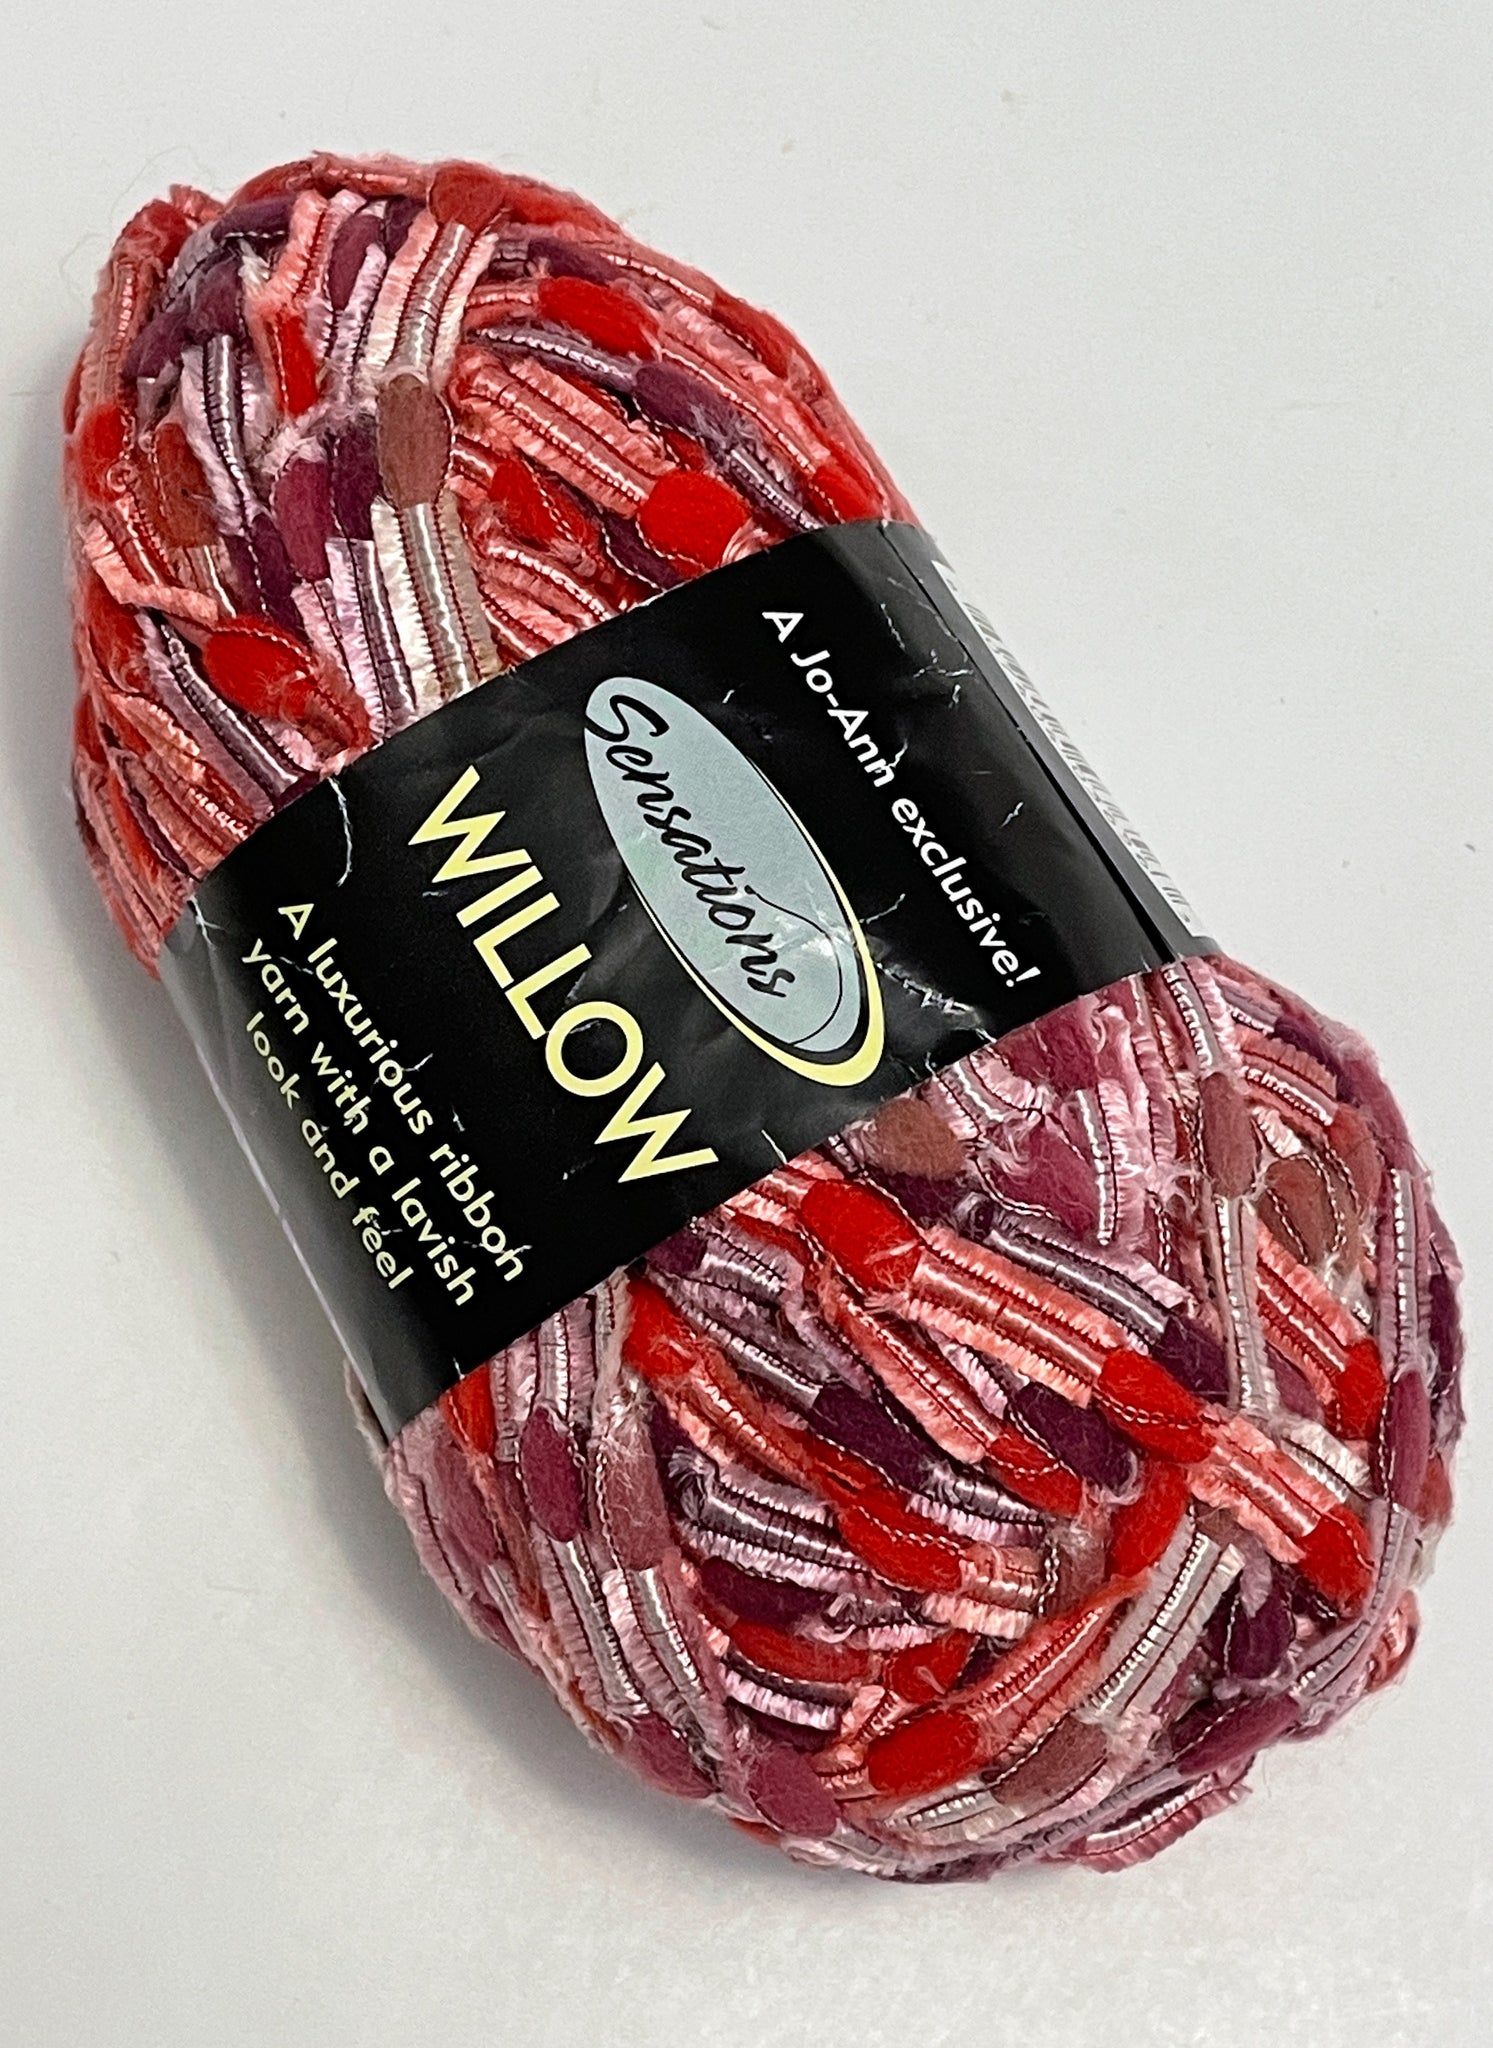 SALE Yarn Nylon/Rayon Blend - Variegated Red and Burgundy